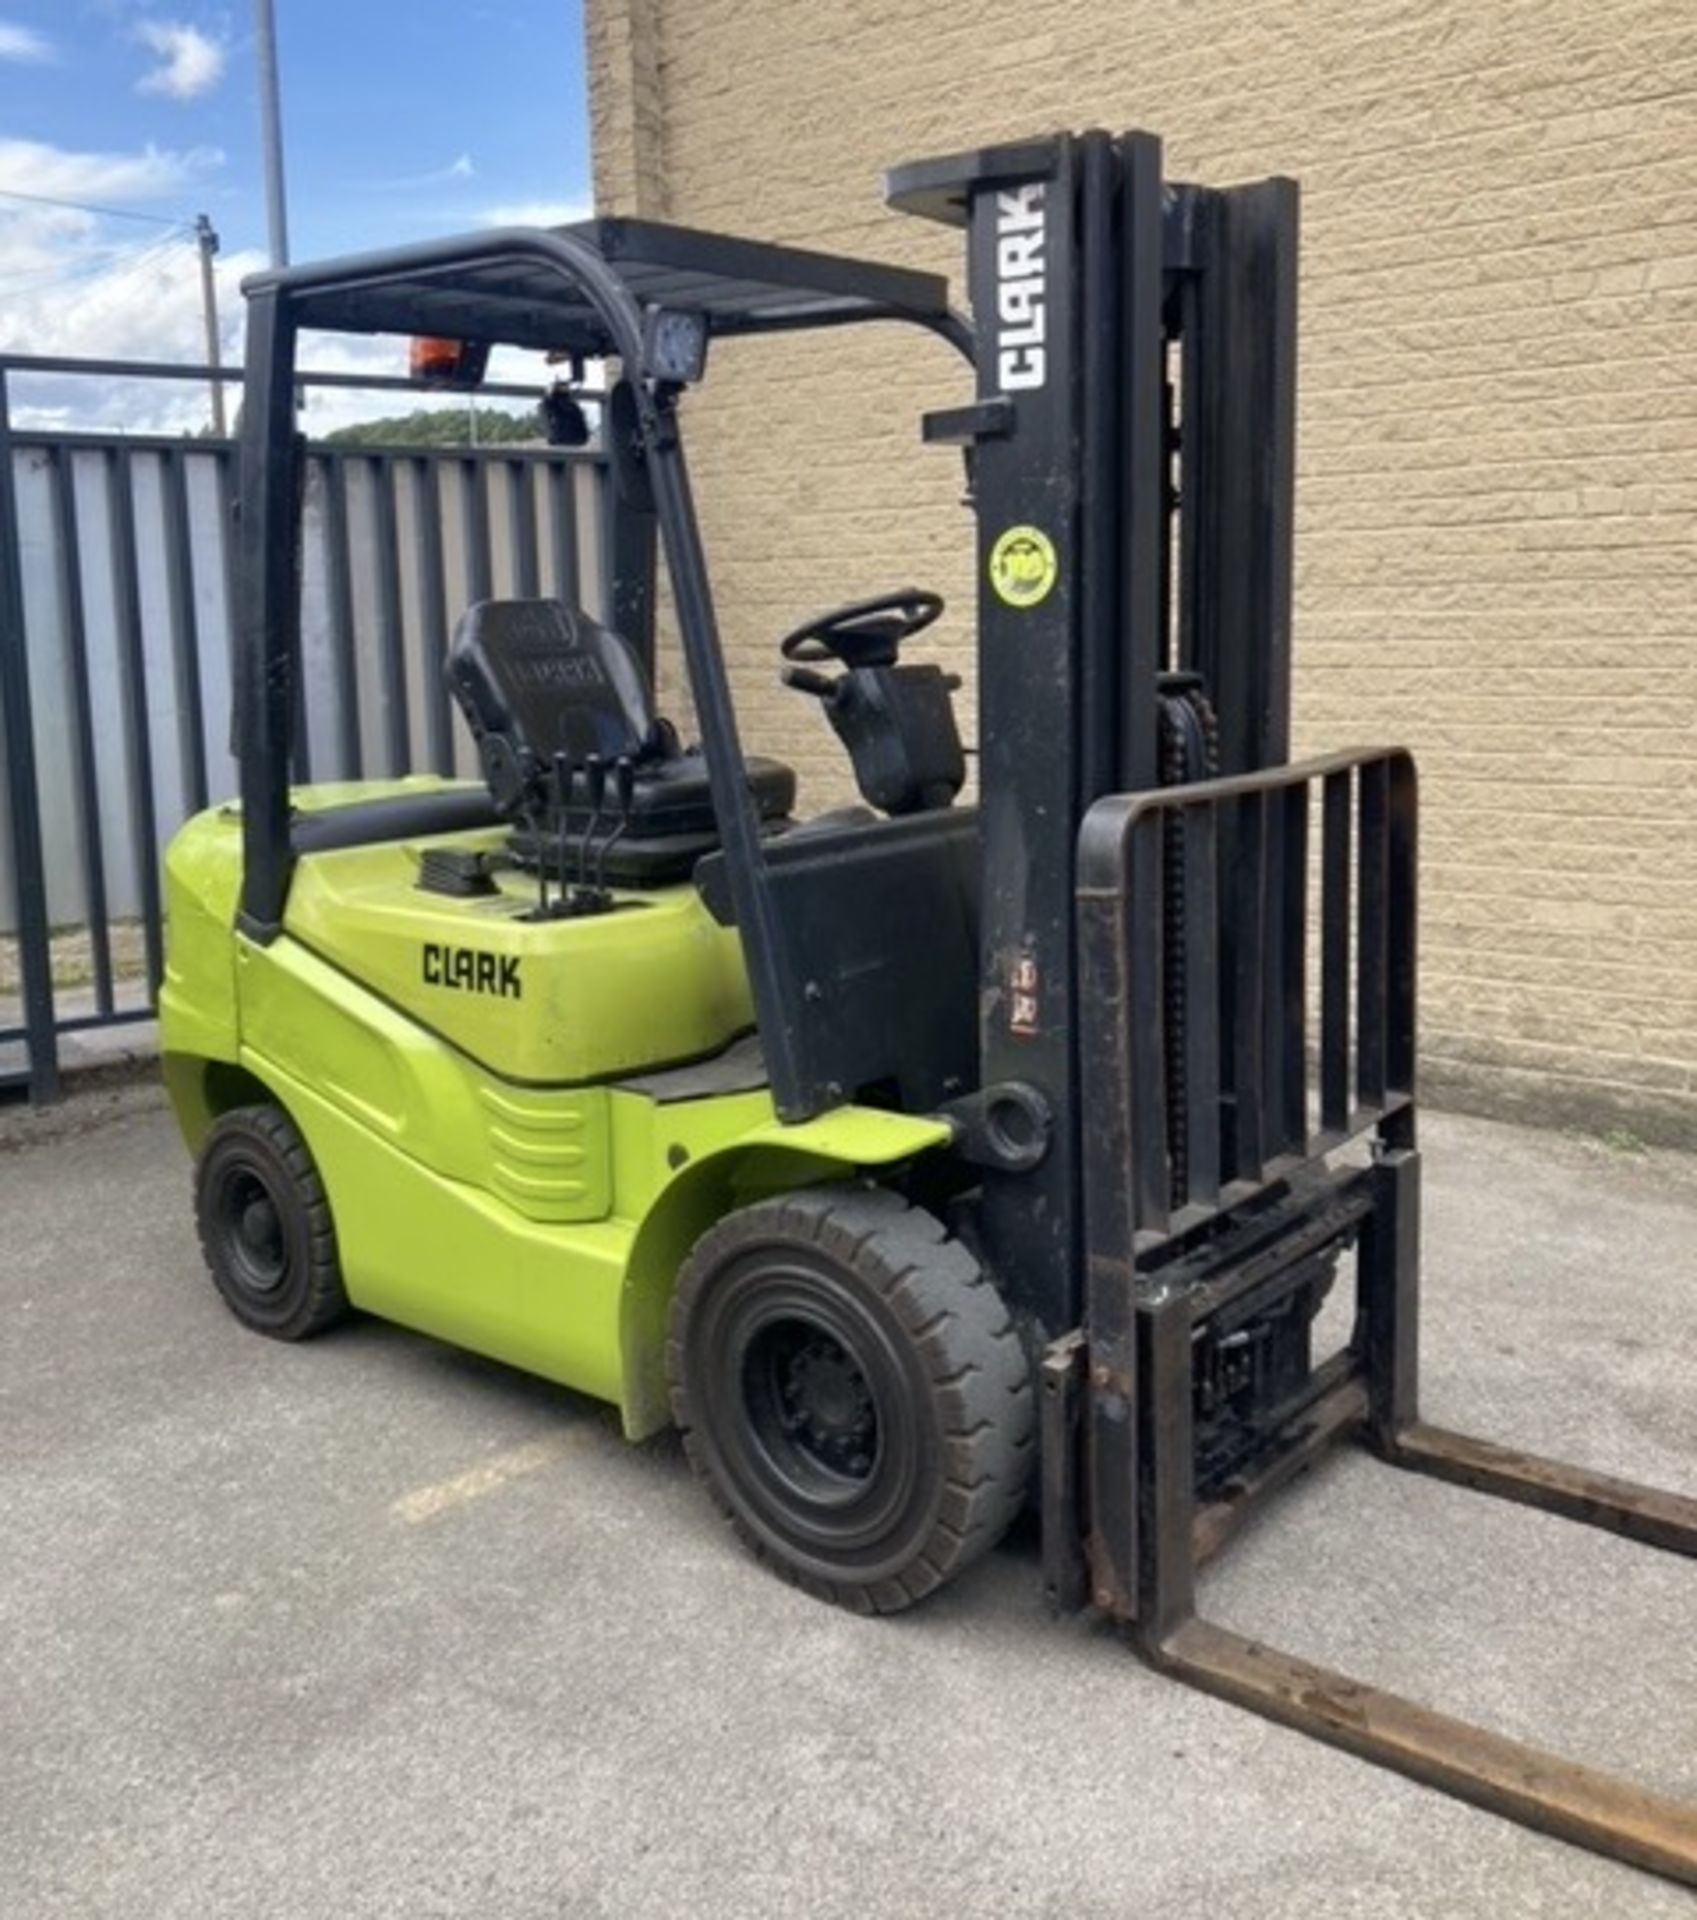 Clark GTS325D diesel Forklift Truck, year 2018, 25 - Image 2 of 23